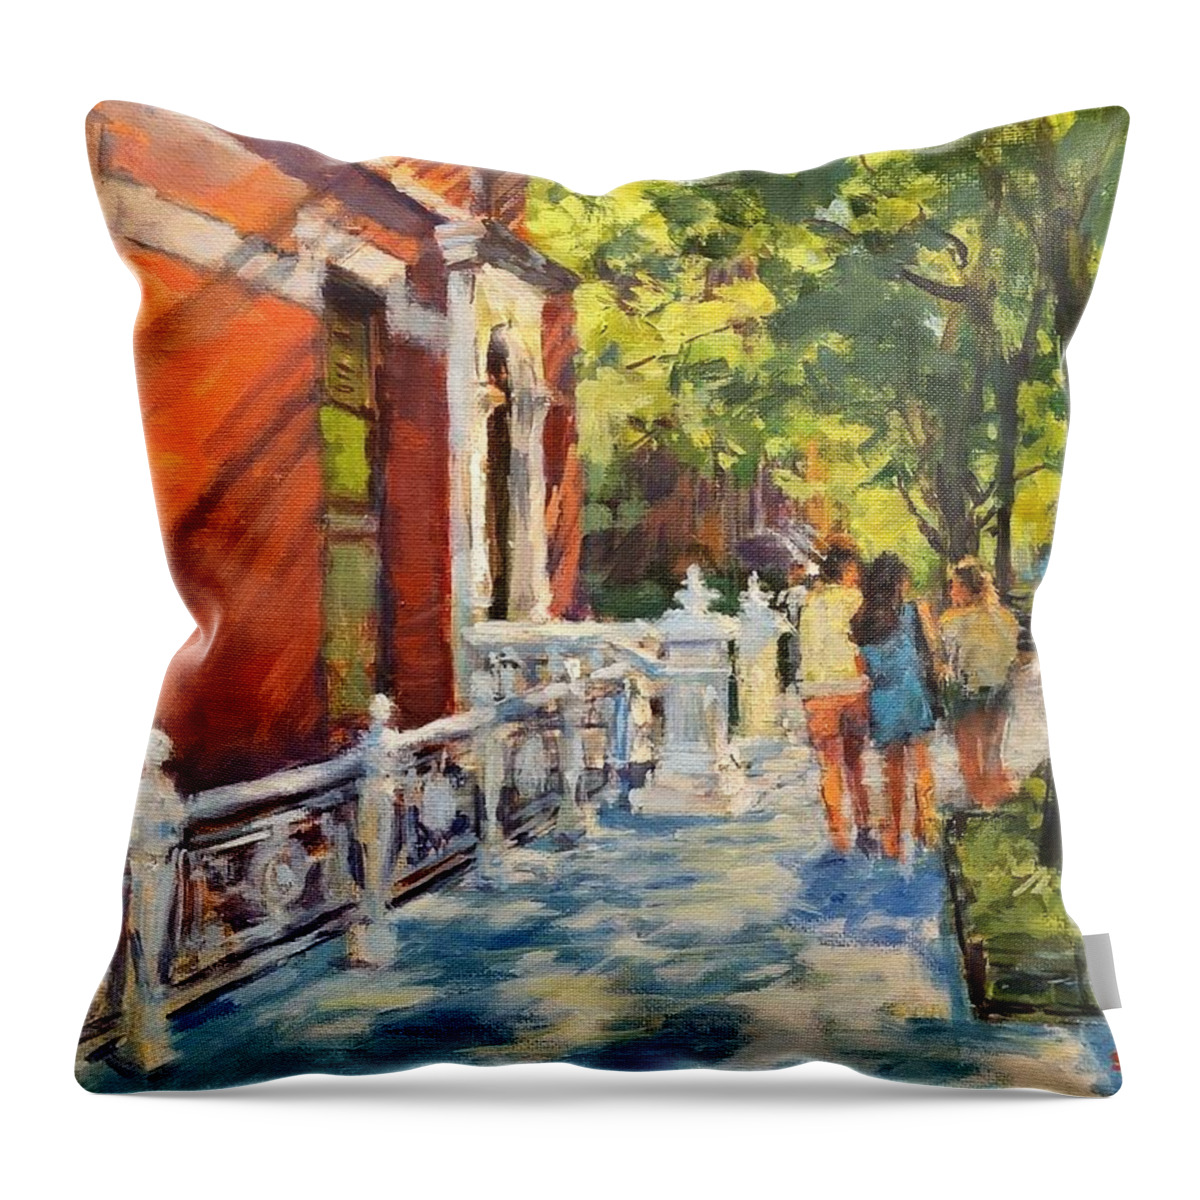  Throw Pillow featuring the painting Summer Morning on West 82nd by Peter Salwen